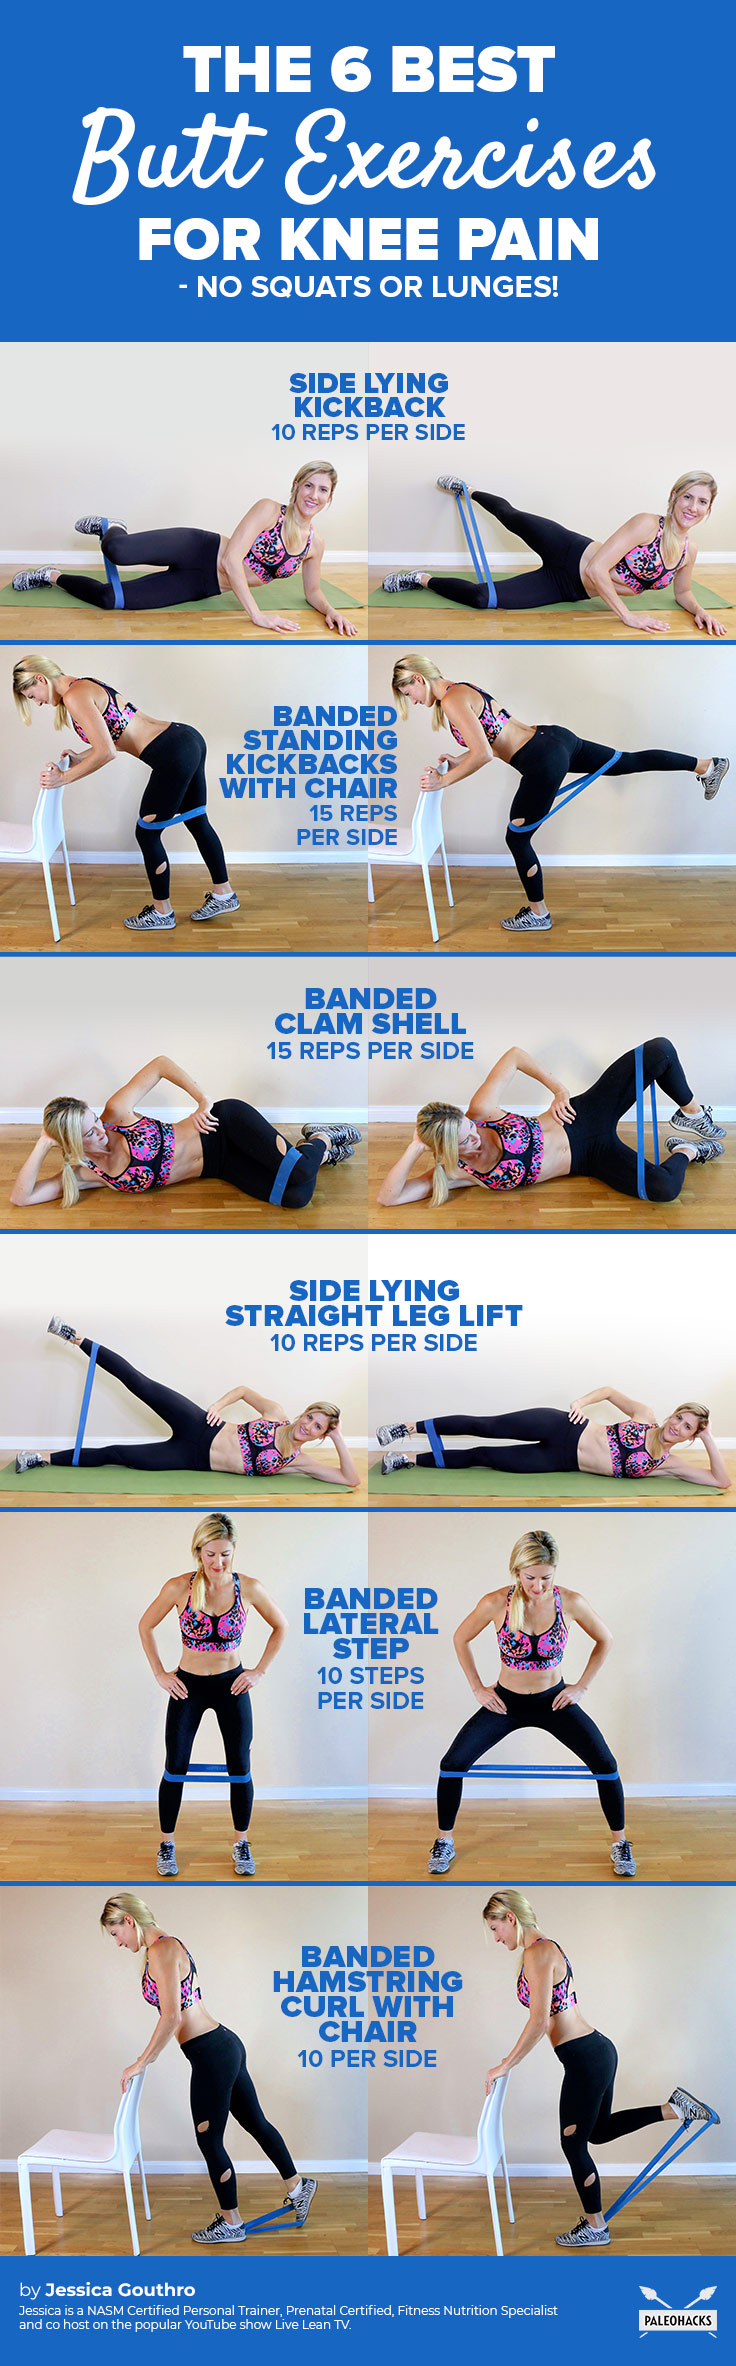 If you suffer from knee pain but still want to strengthen your lower body, try these easy exercises that put little to no stress on the knees.